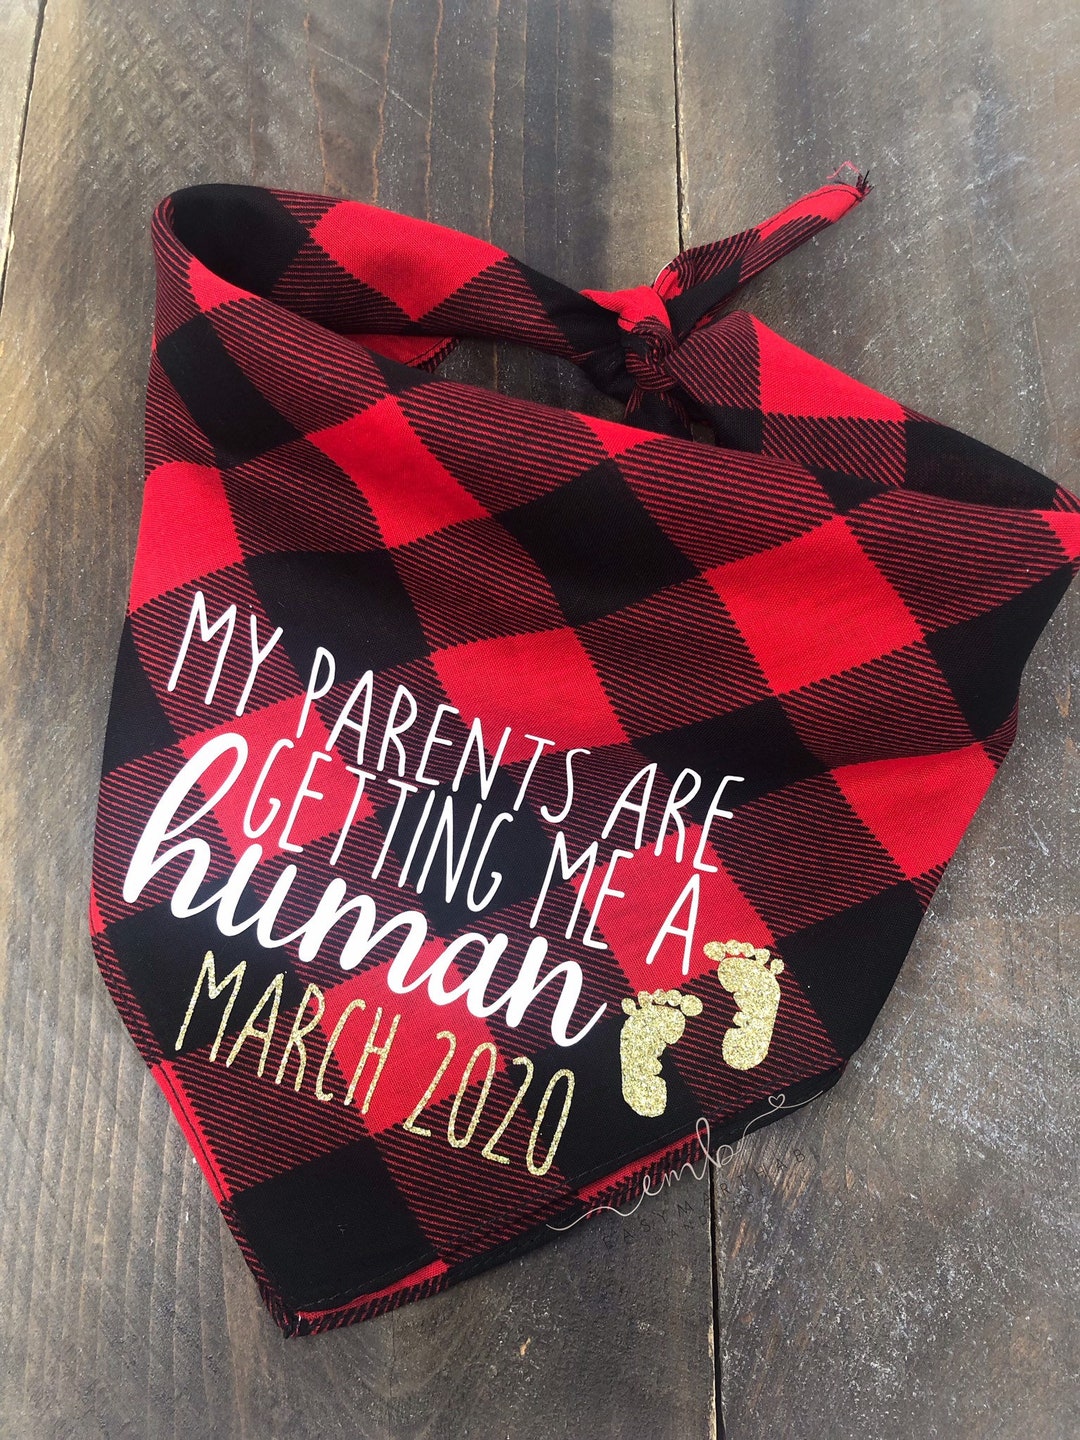 My Parents Are Getting Me A Human Dog Bandana. Pregnancy - Etsy